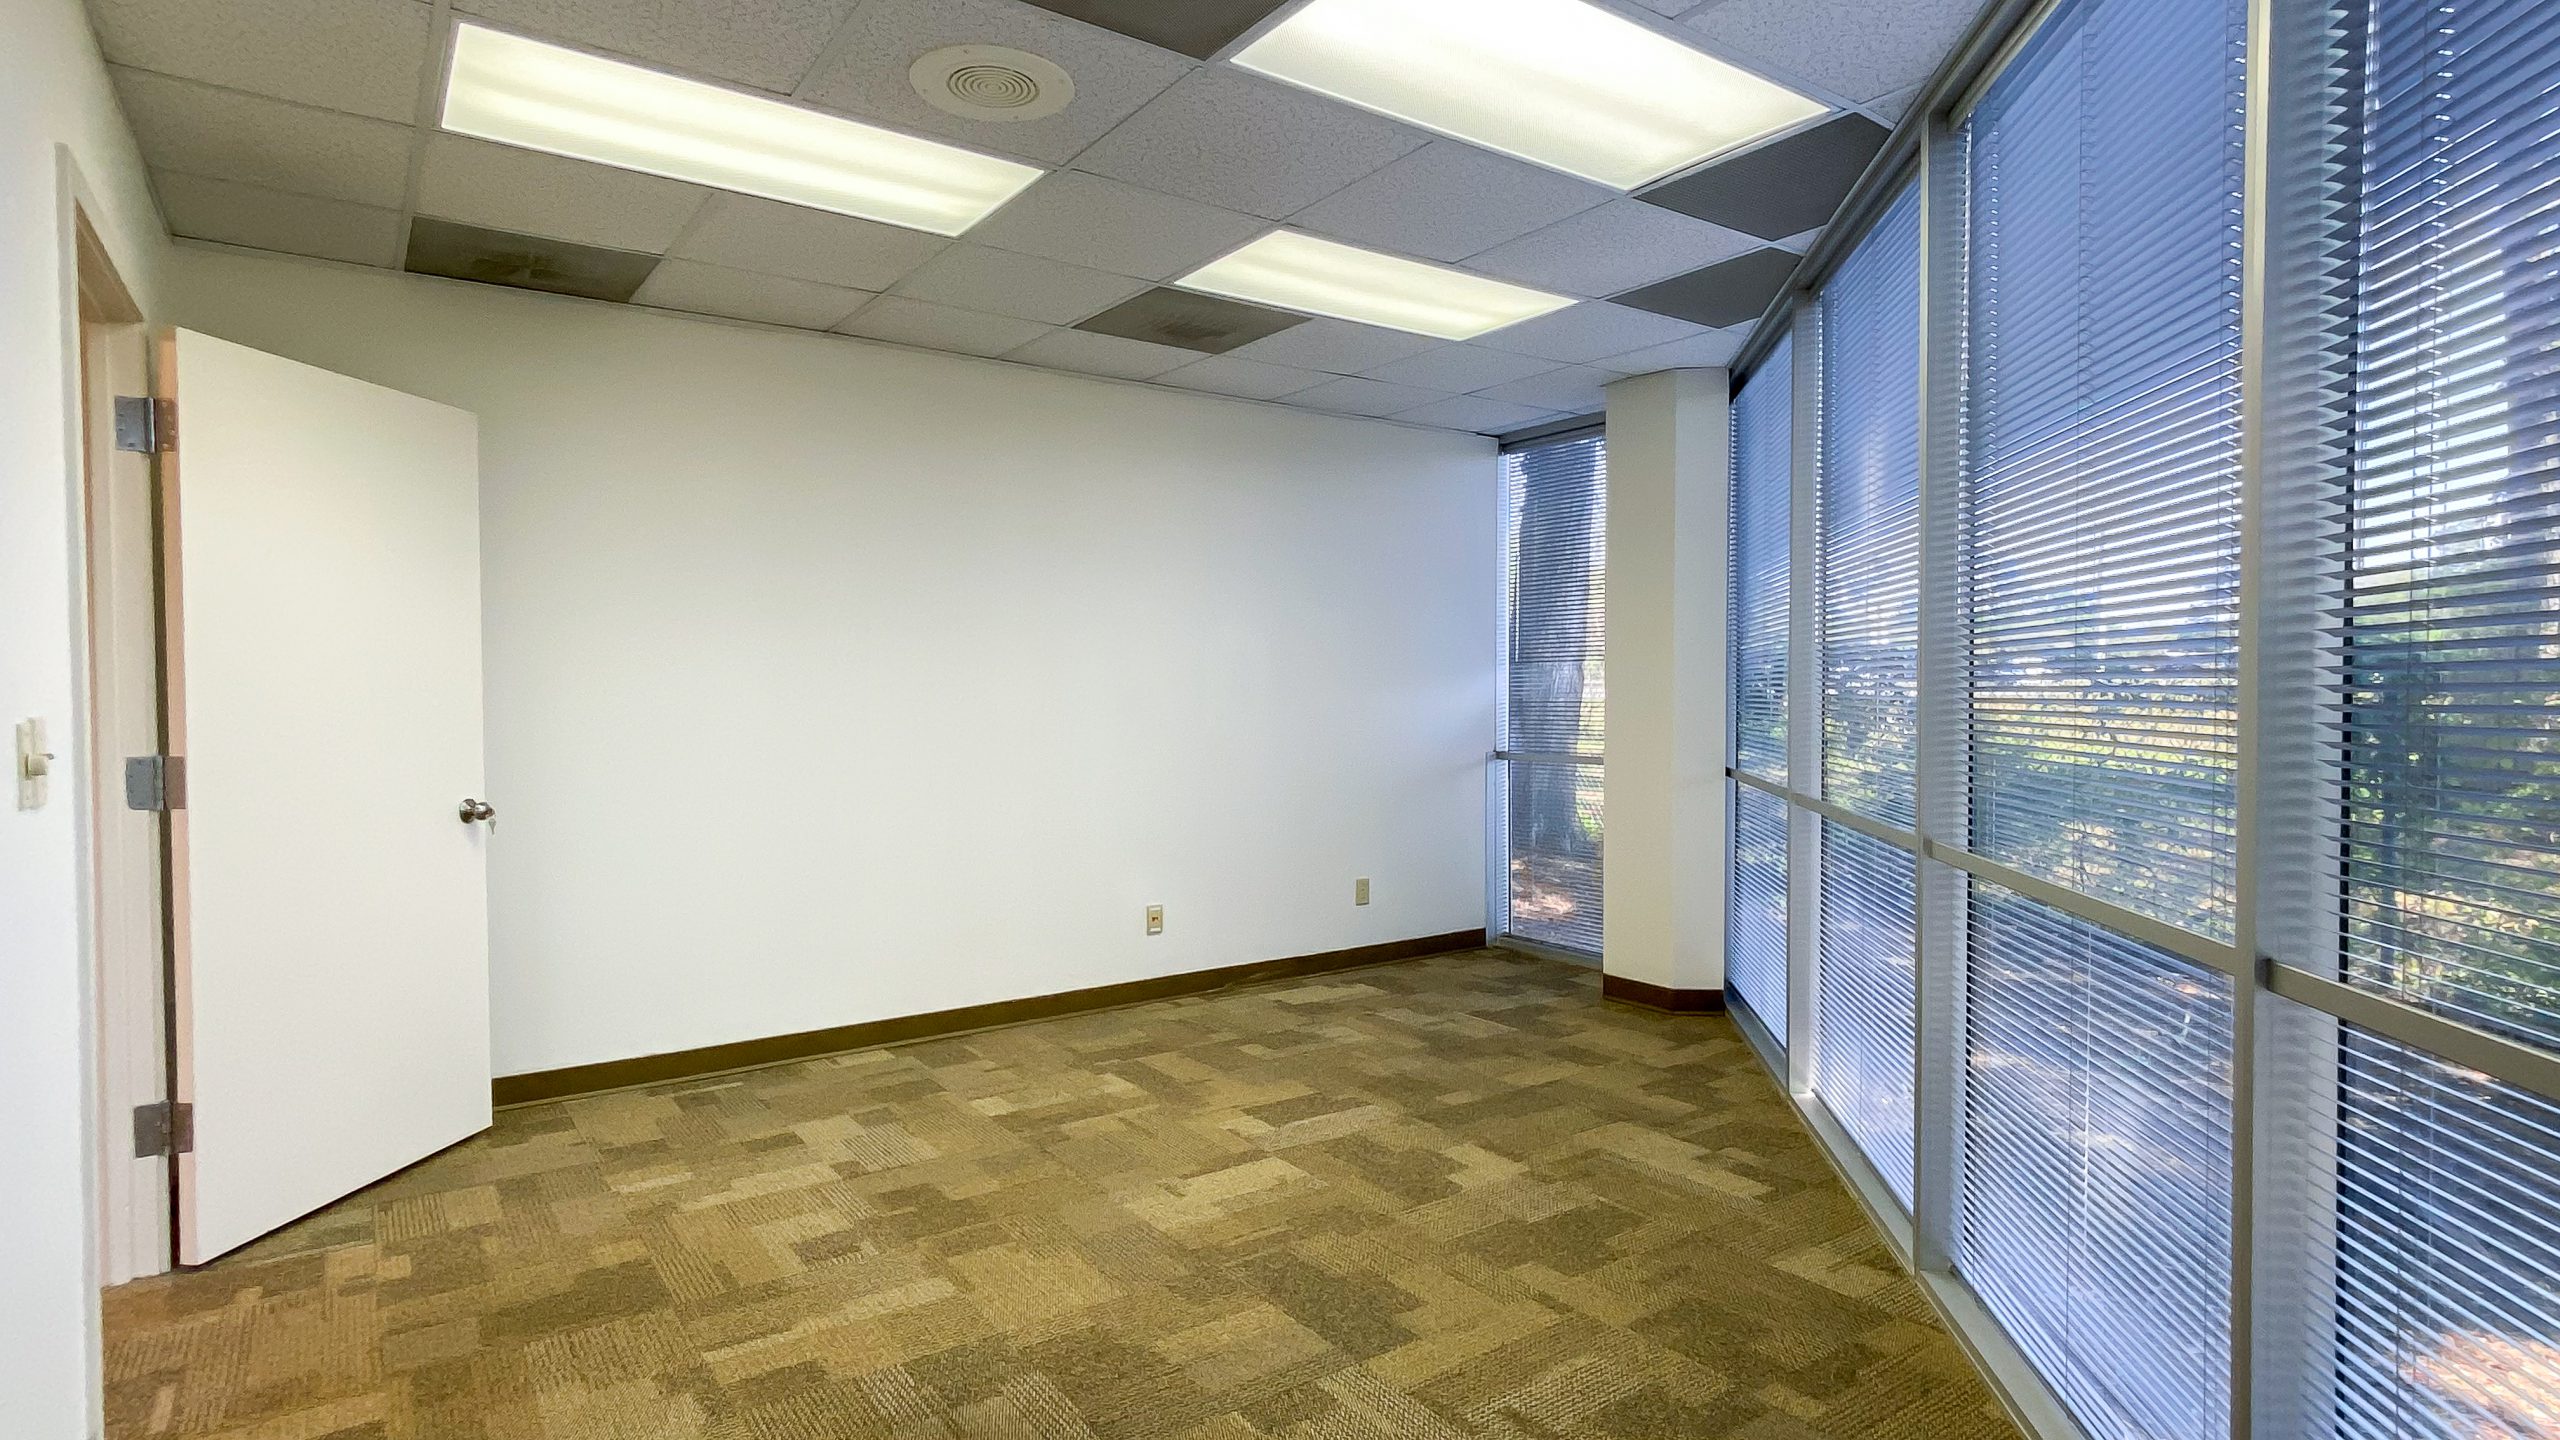 The interior of an office space for lease.